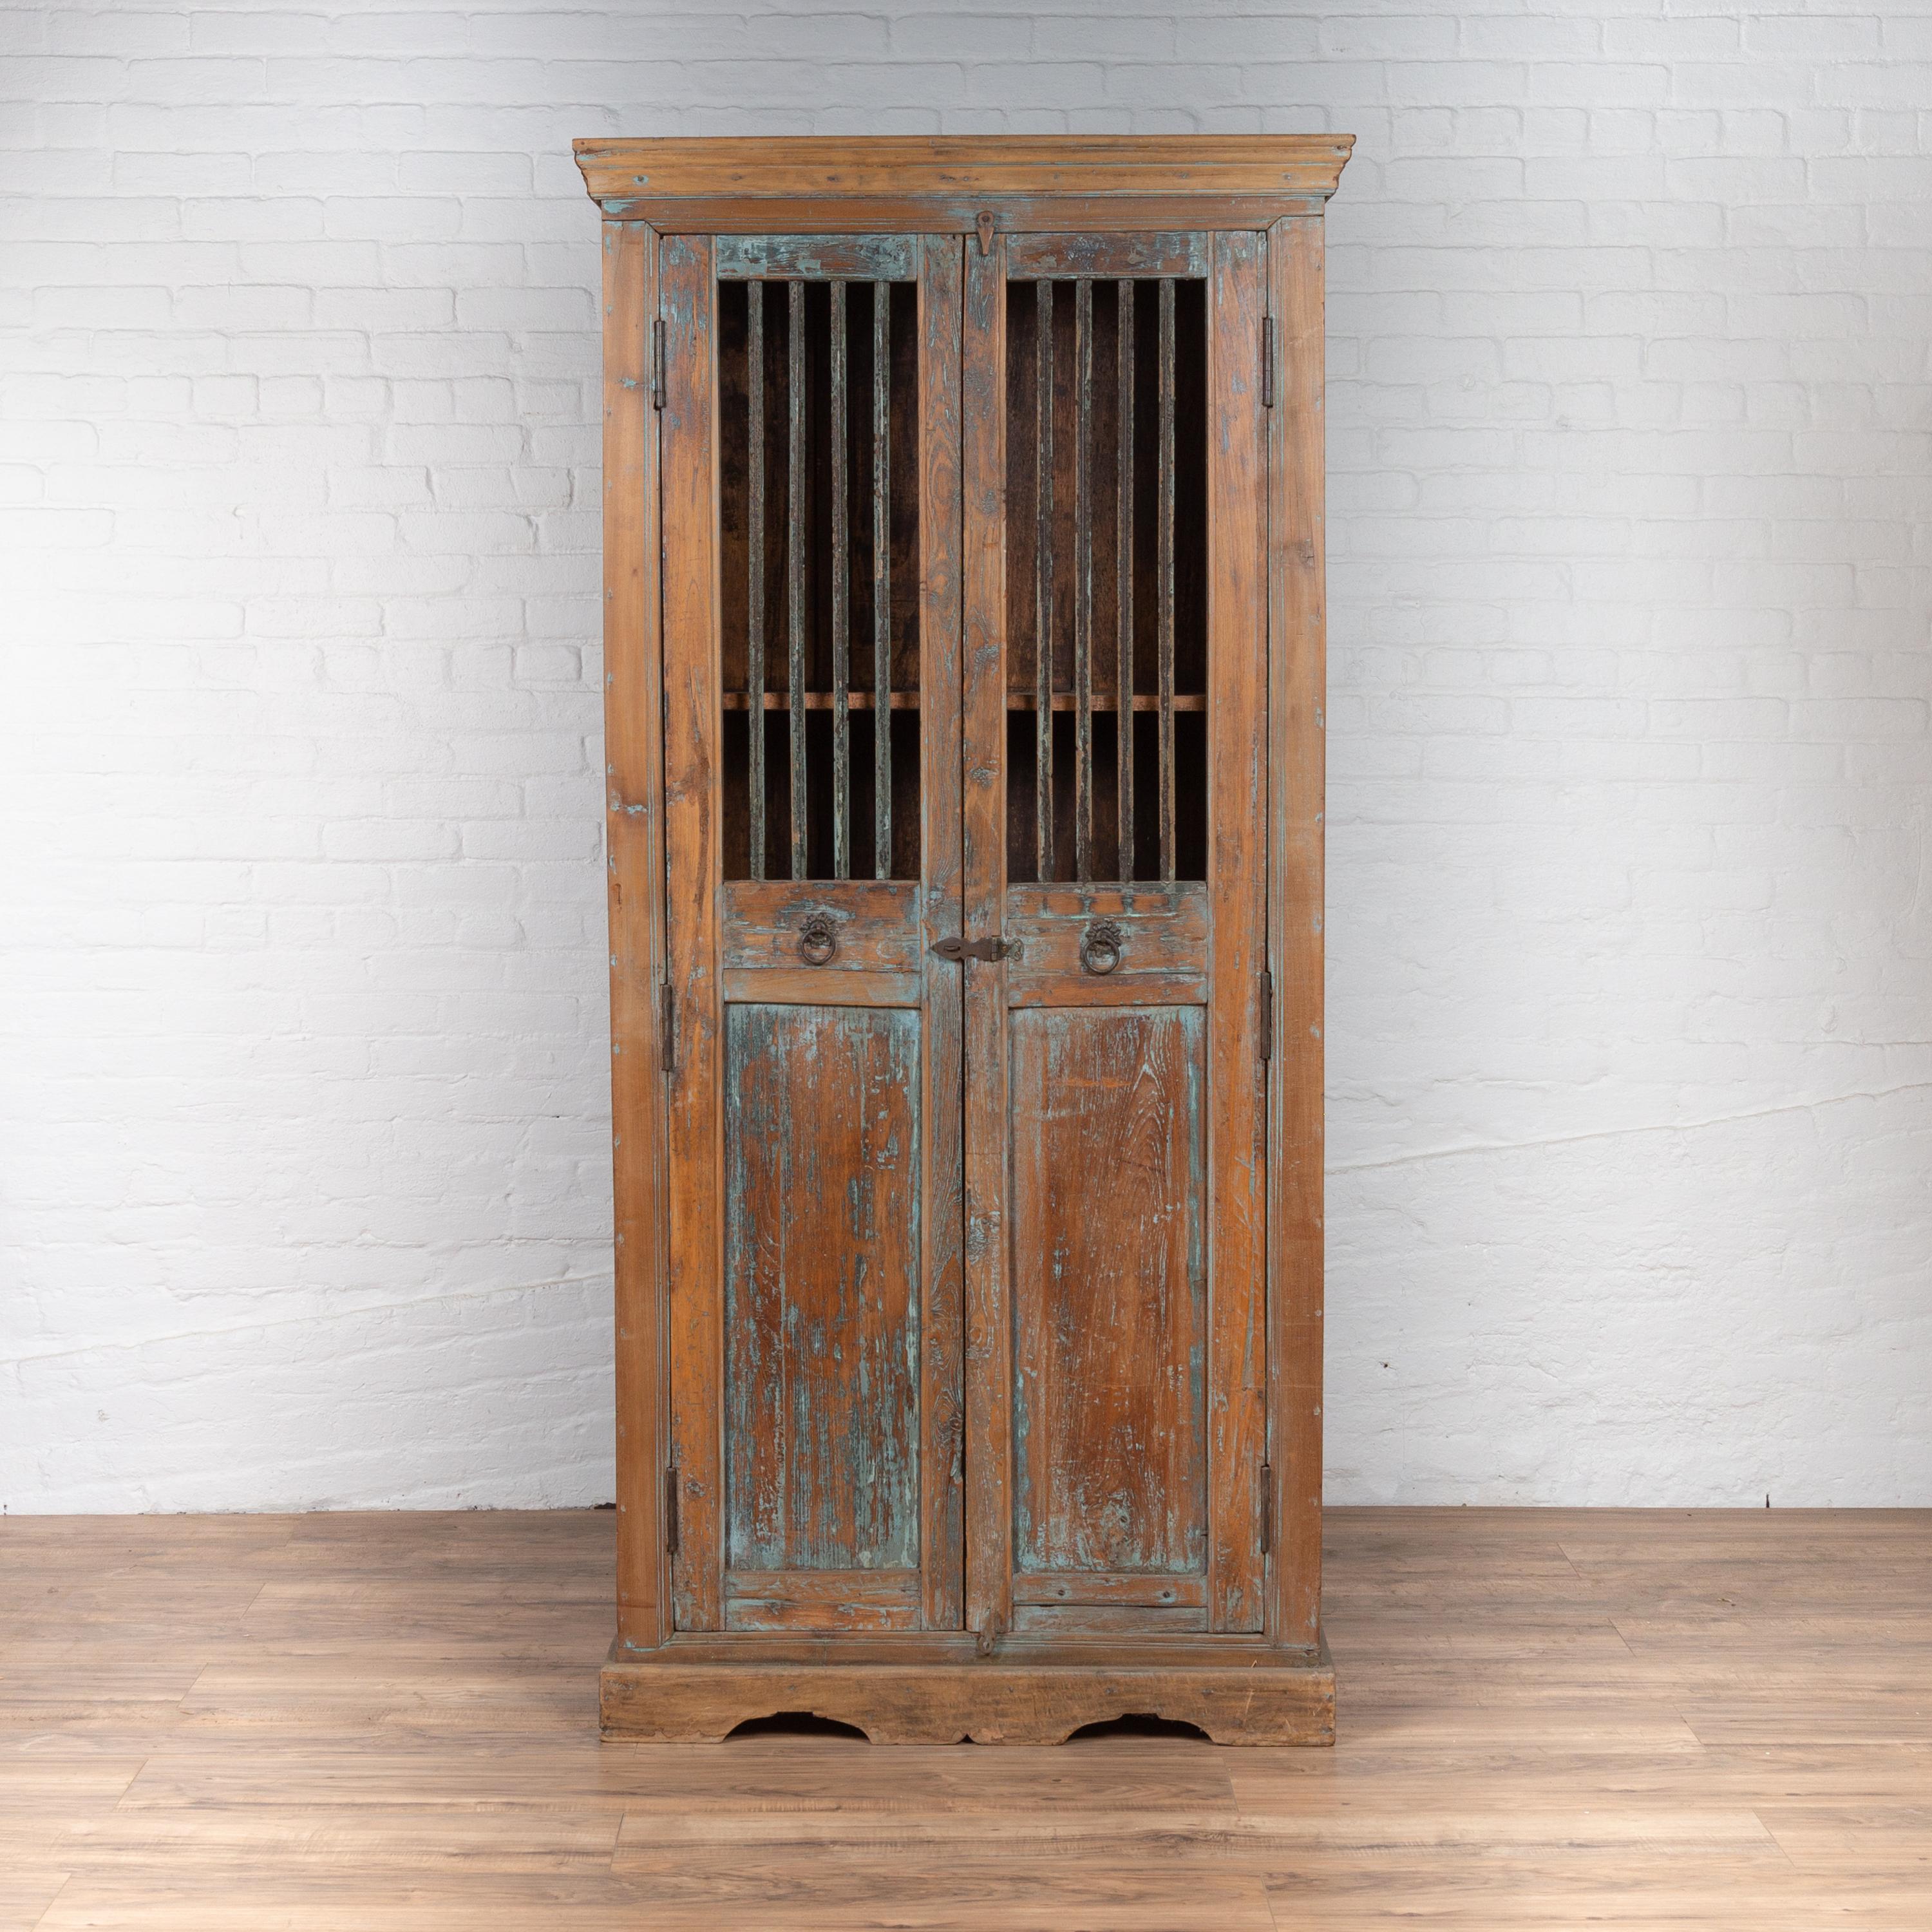 An Indian antique wooden kitchen cabinet from the early 20th century with distressed finish and slatted doors. Born in India during the early years of the 20th century, this charming kitchen cabinet features a molded cornice sitting above two tall